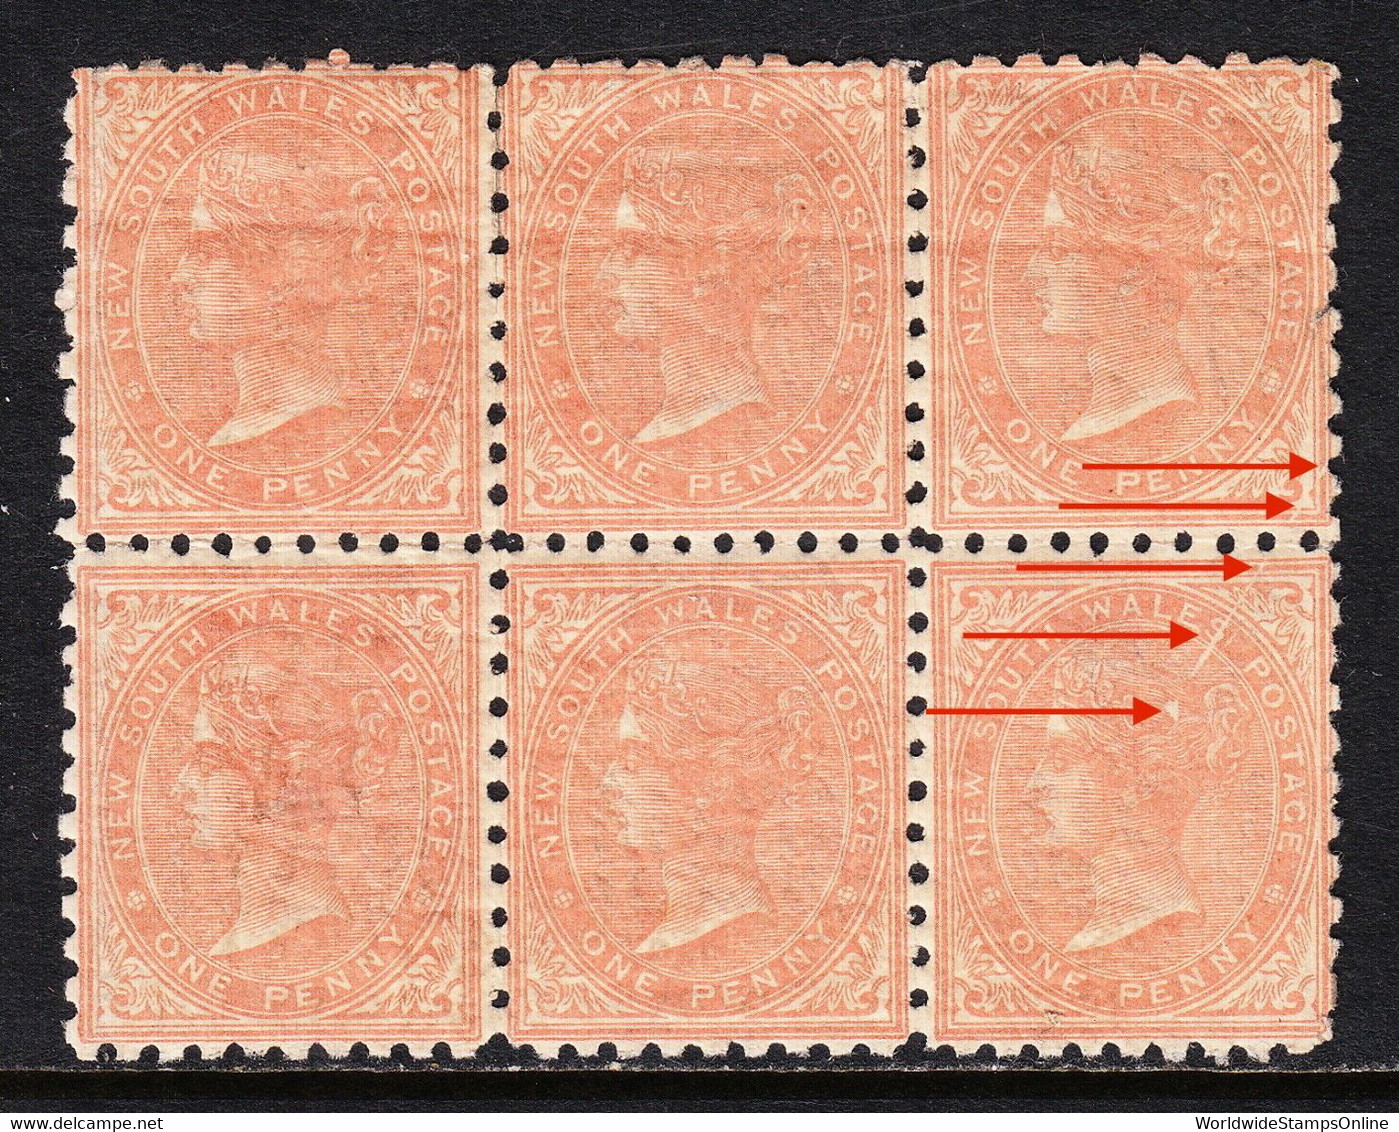 NEW SOUTH WALES — SCOTT 61a (SG 222)— 1882 1d SALMON — MH — BLOCK/6 W/PLATE FLAW - Mint Stamps